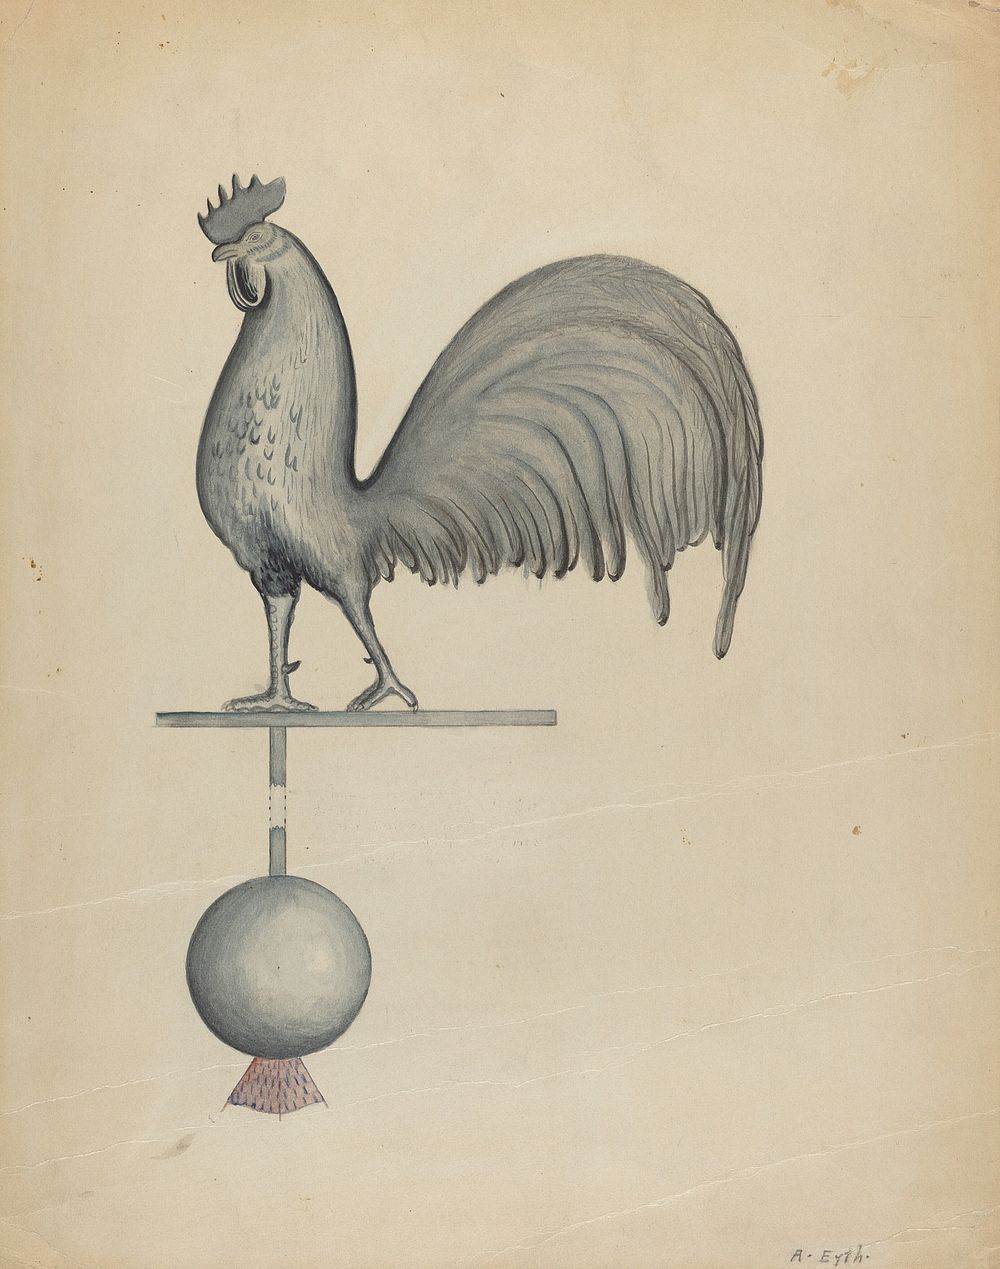 Weather Vane - Iron Rooster (c. 1937) by Albert Eyth.  